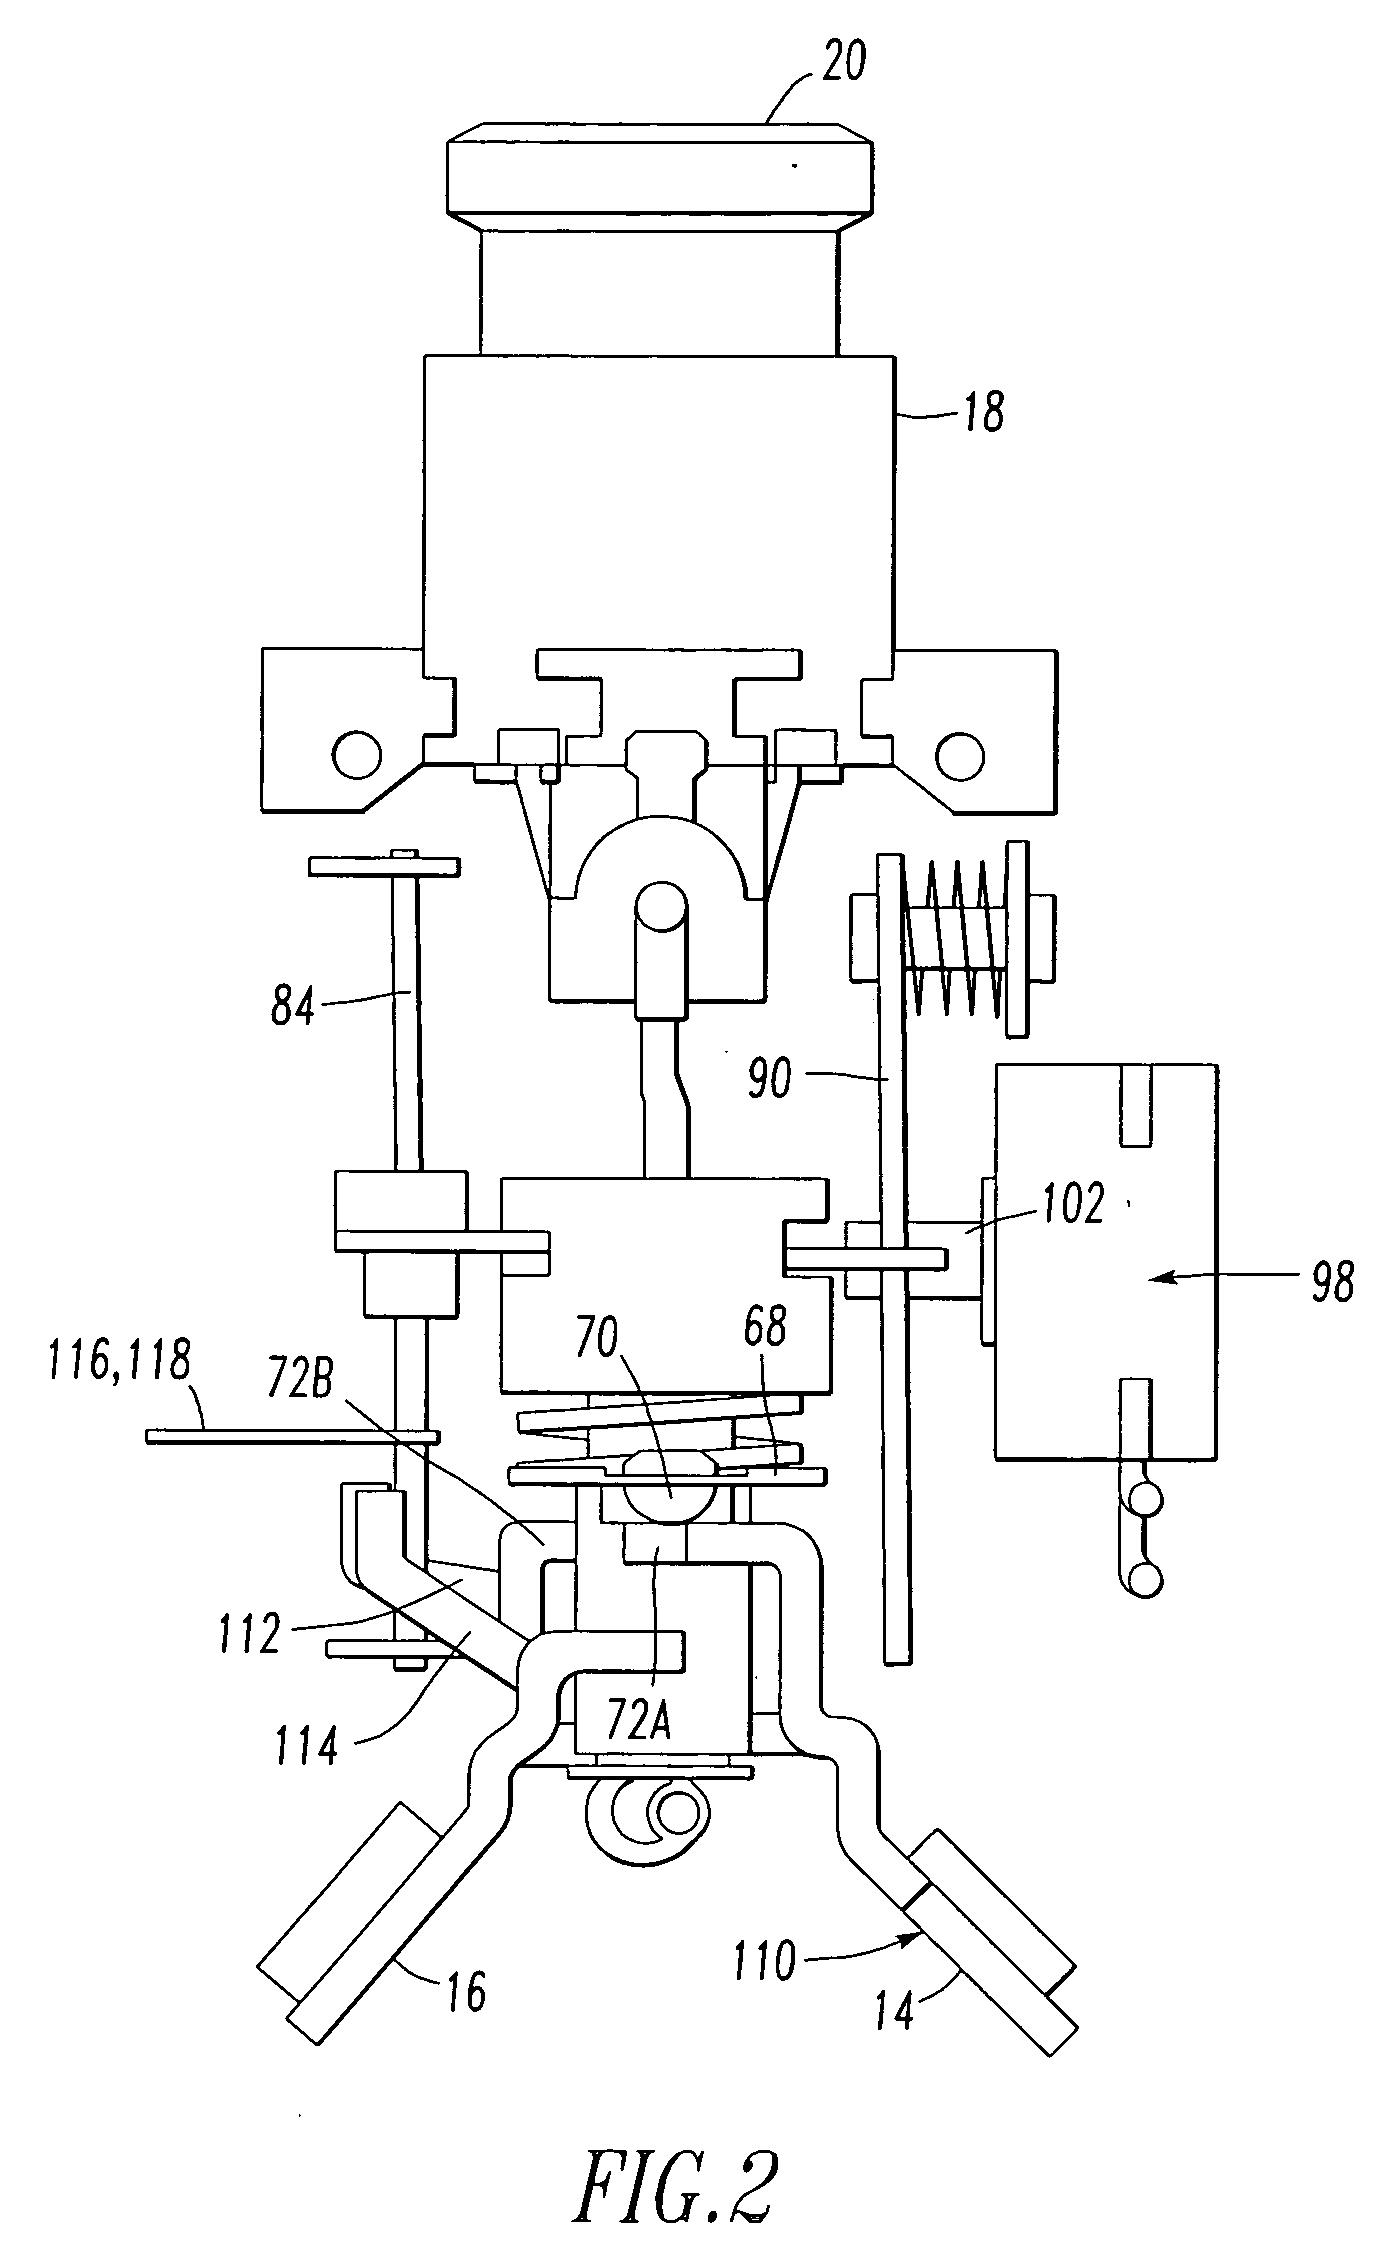 Electrical switching apparatus including a housing and a trip circuit forming a composite structure